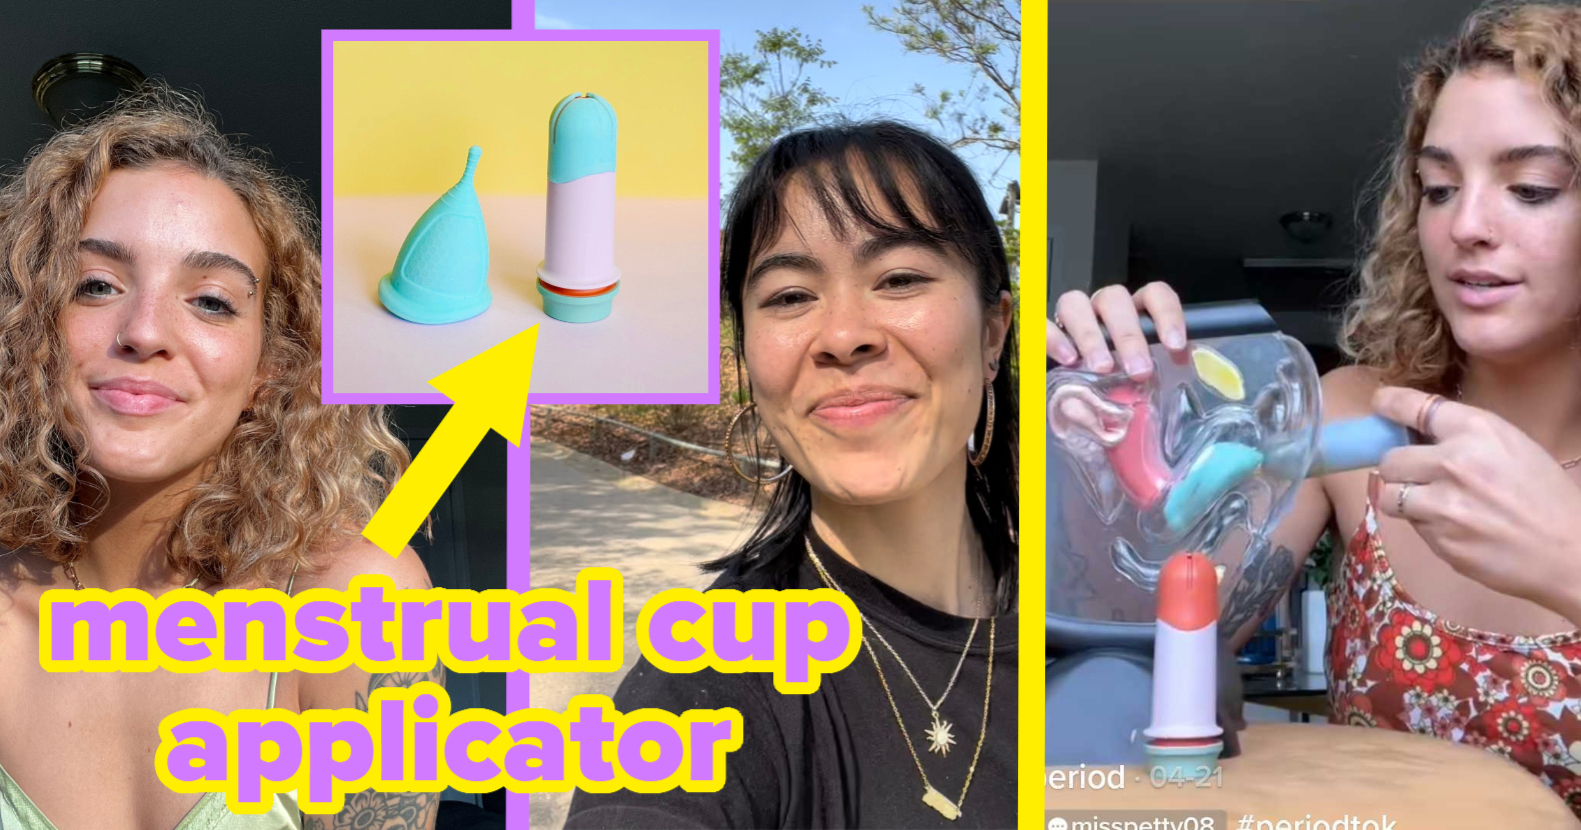 June Co, June Cup for Women - Reusable Menstrual Cups - Ph Friendly Period Cup - Flexible Menstrual Cup, Medical-Grade Silicone Cup - Feminine